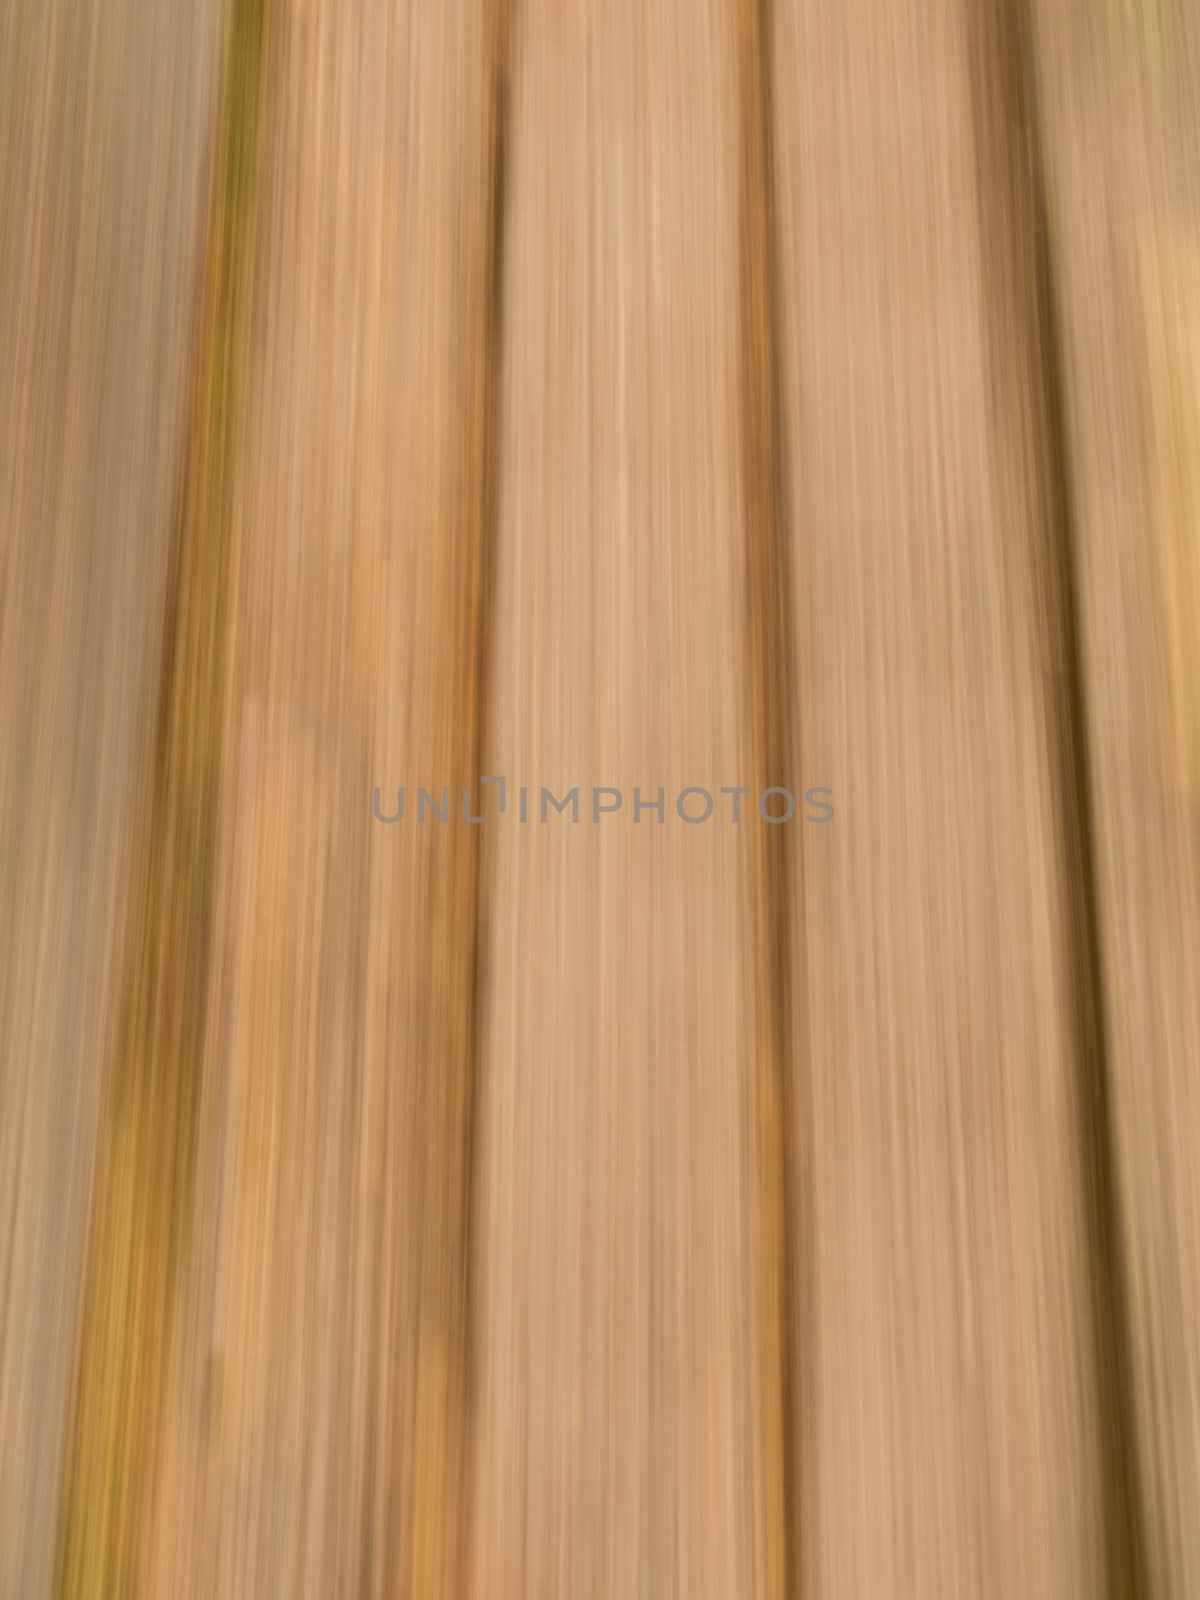 Vertical of lines produced by camera motion blur